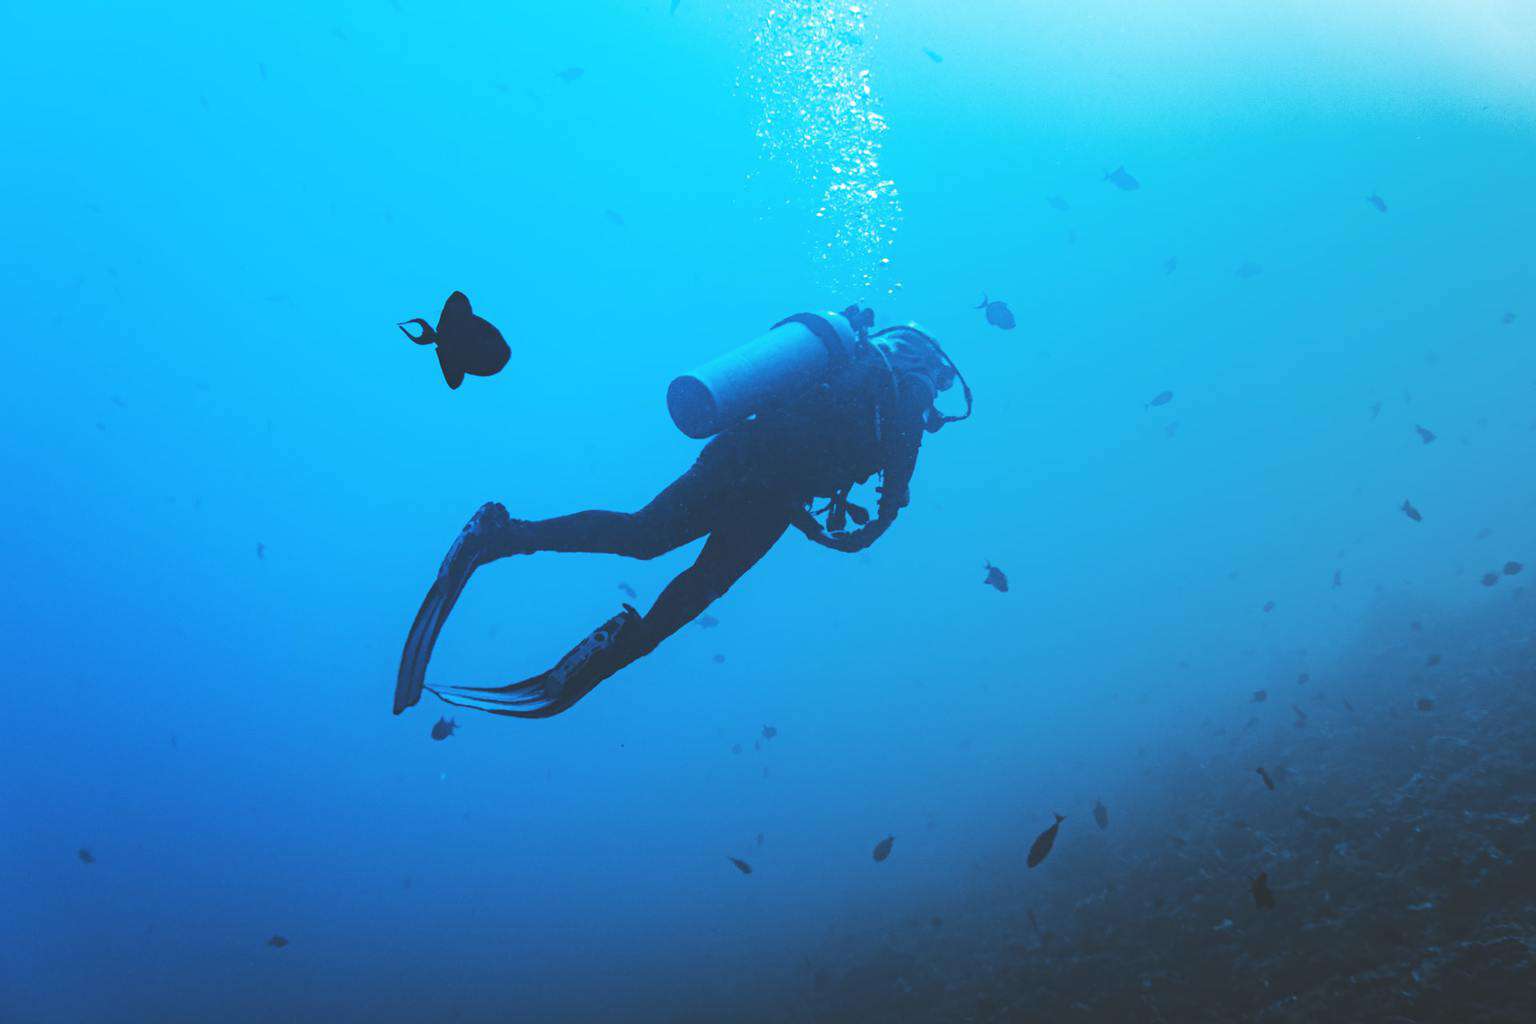 Is Scuba Diving Dangerous? (+6 Things to Avoid After Diving)